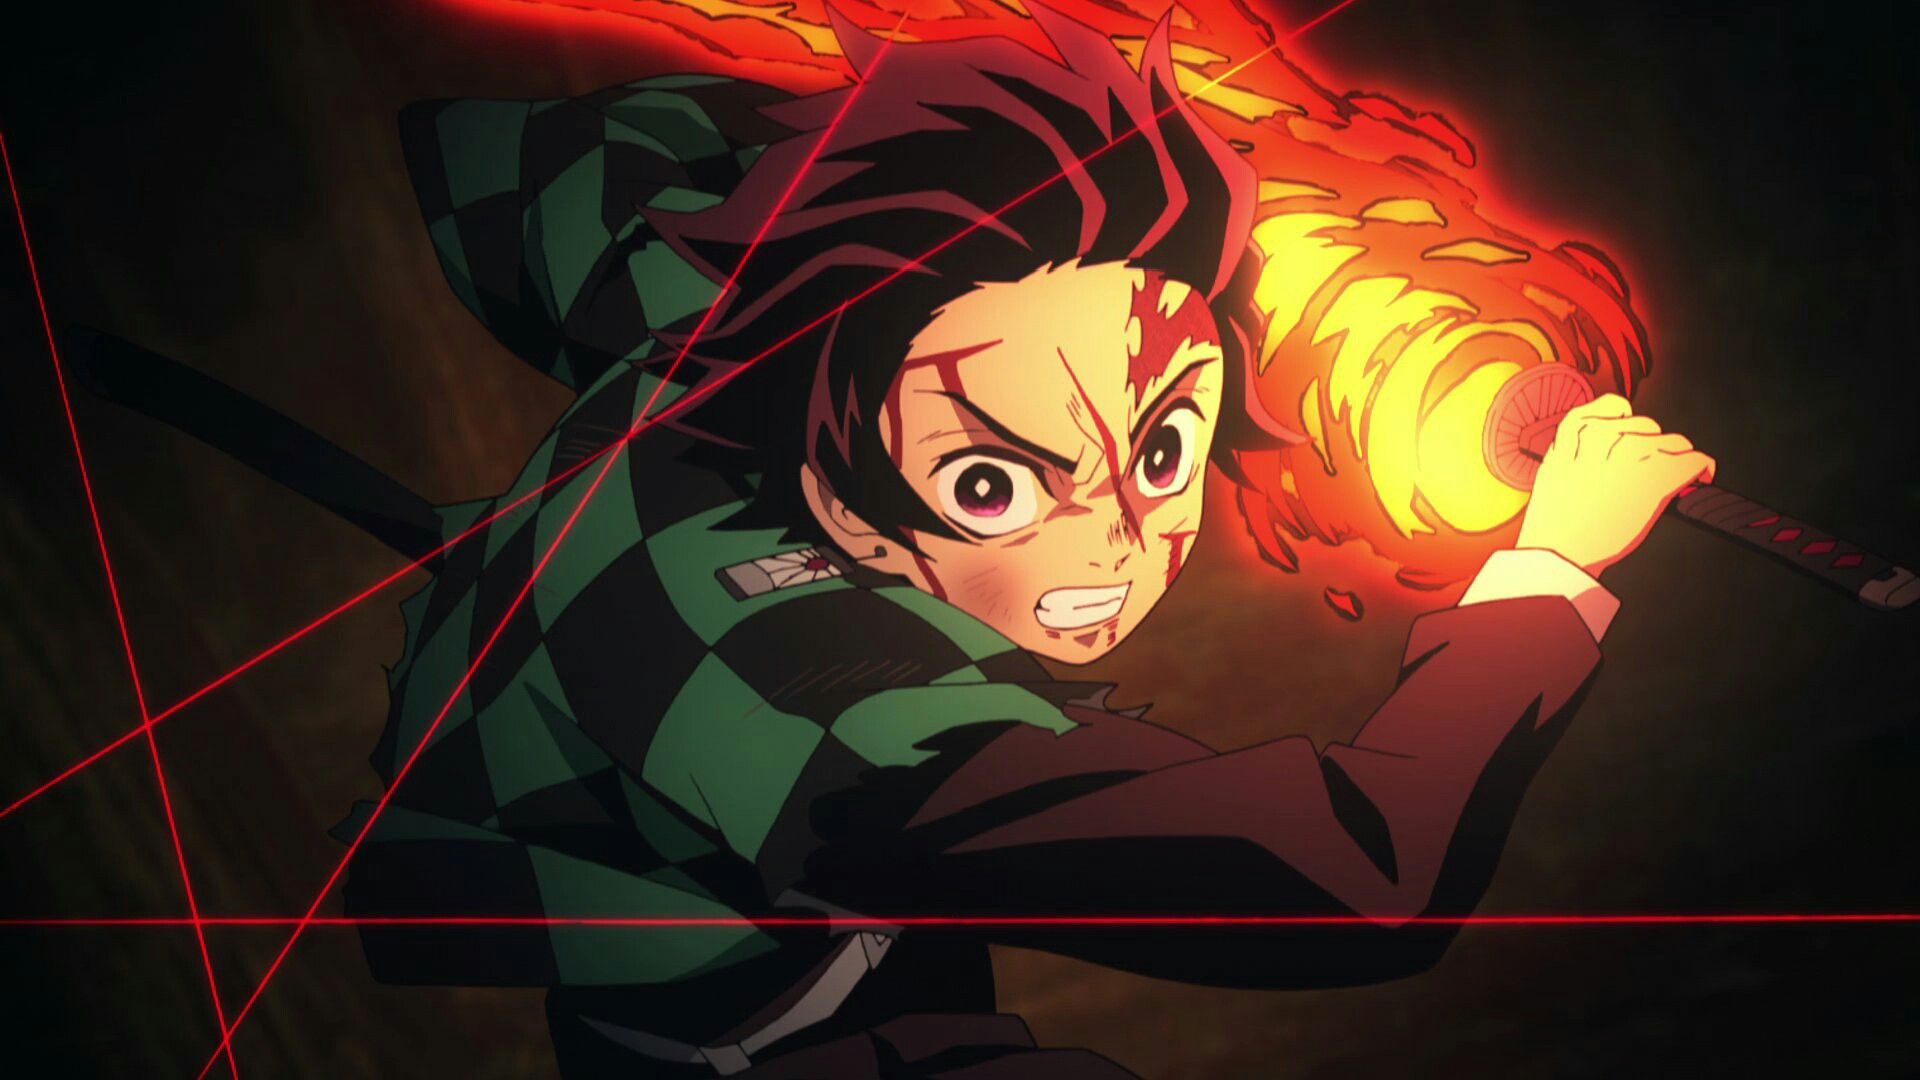 Demon Slayer Season 3 Episode 1 Review - But Why Tho?